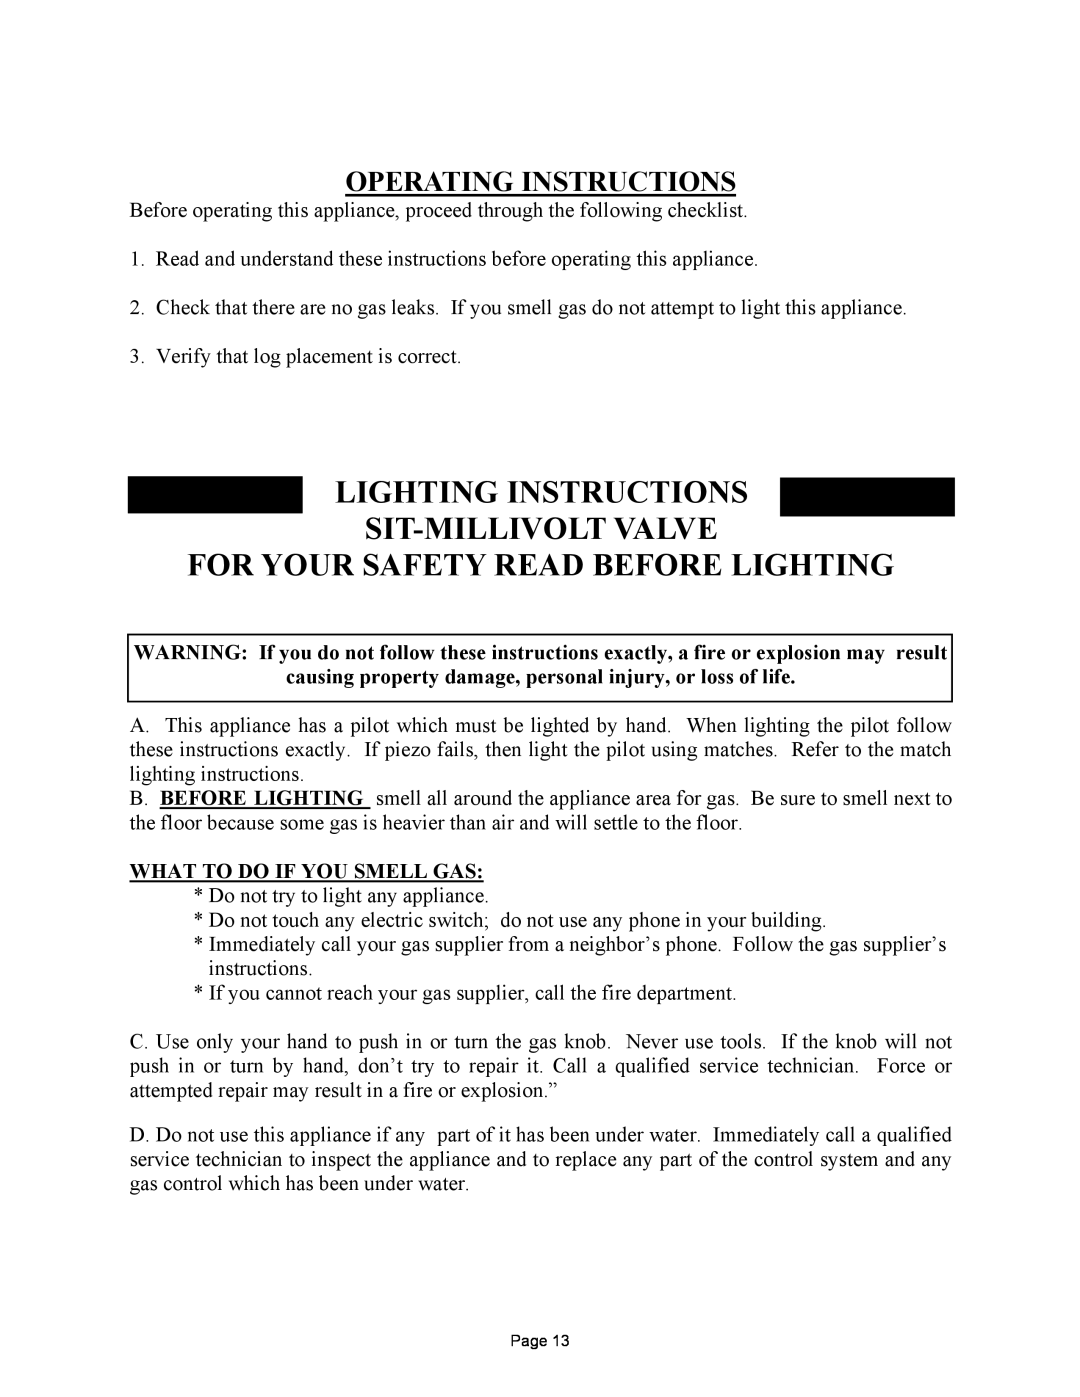 New Buck Corporation 384 manual Lighting Instructions Sit-Millivolt Valve, For Your Safety Read Before Lighting 